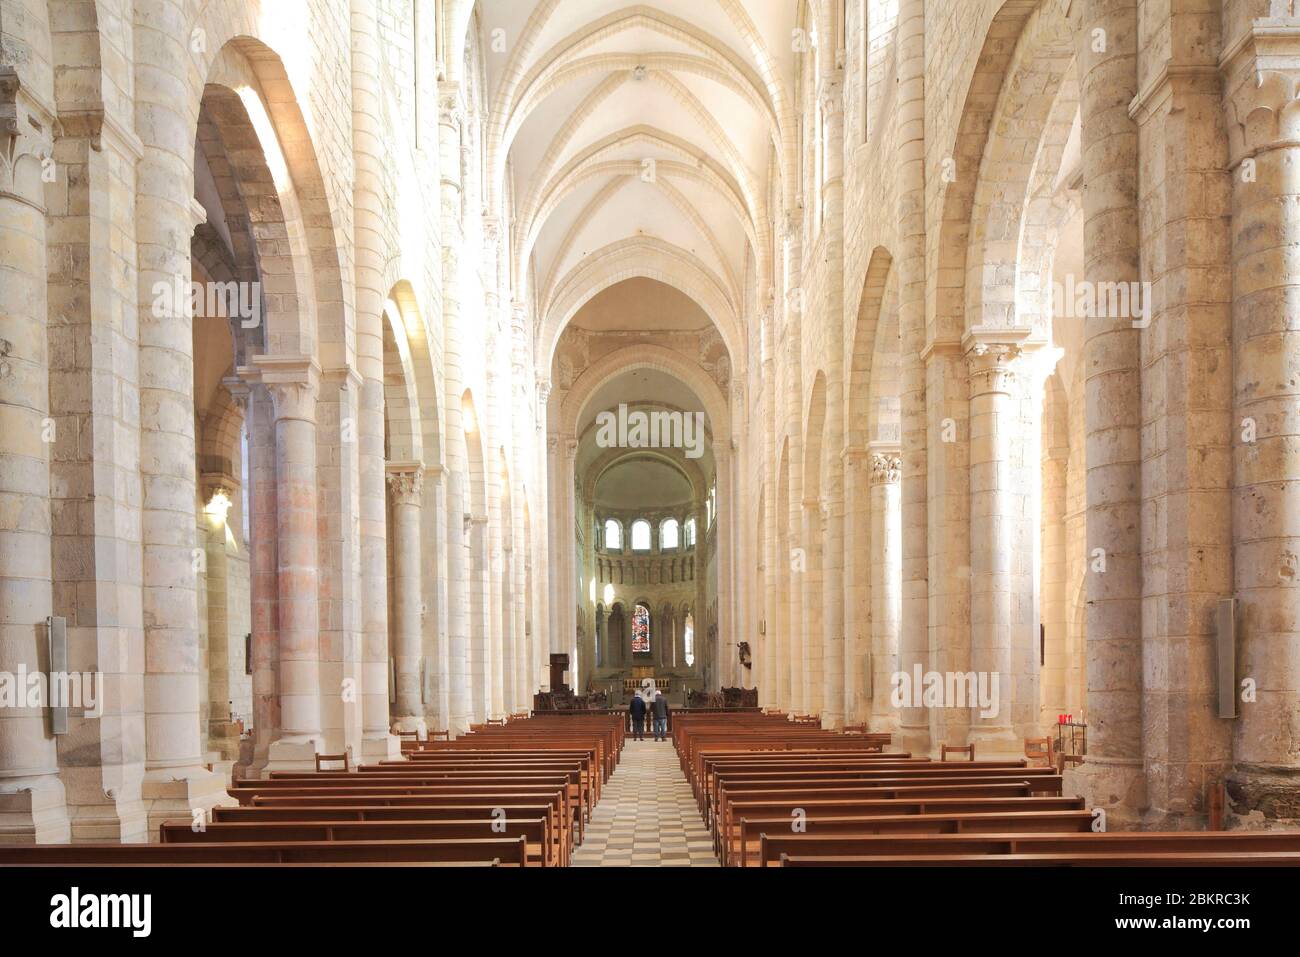 France, Loiret, Saint Benoit sur Loire (commune is located within the perimeter of the Loire Valley listed as World Heritage by UNESCO), Benedictine Abbey of Fleury, nave from the 13th century Stock Photo